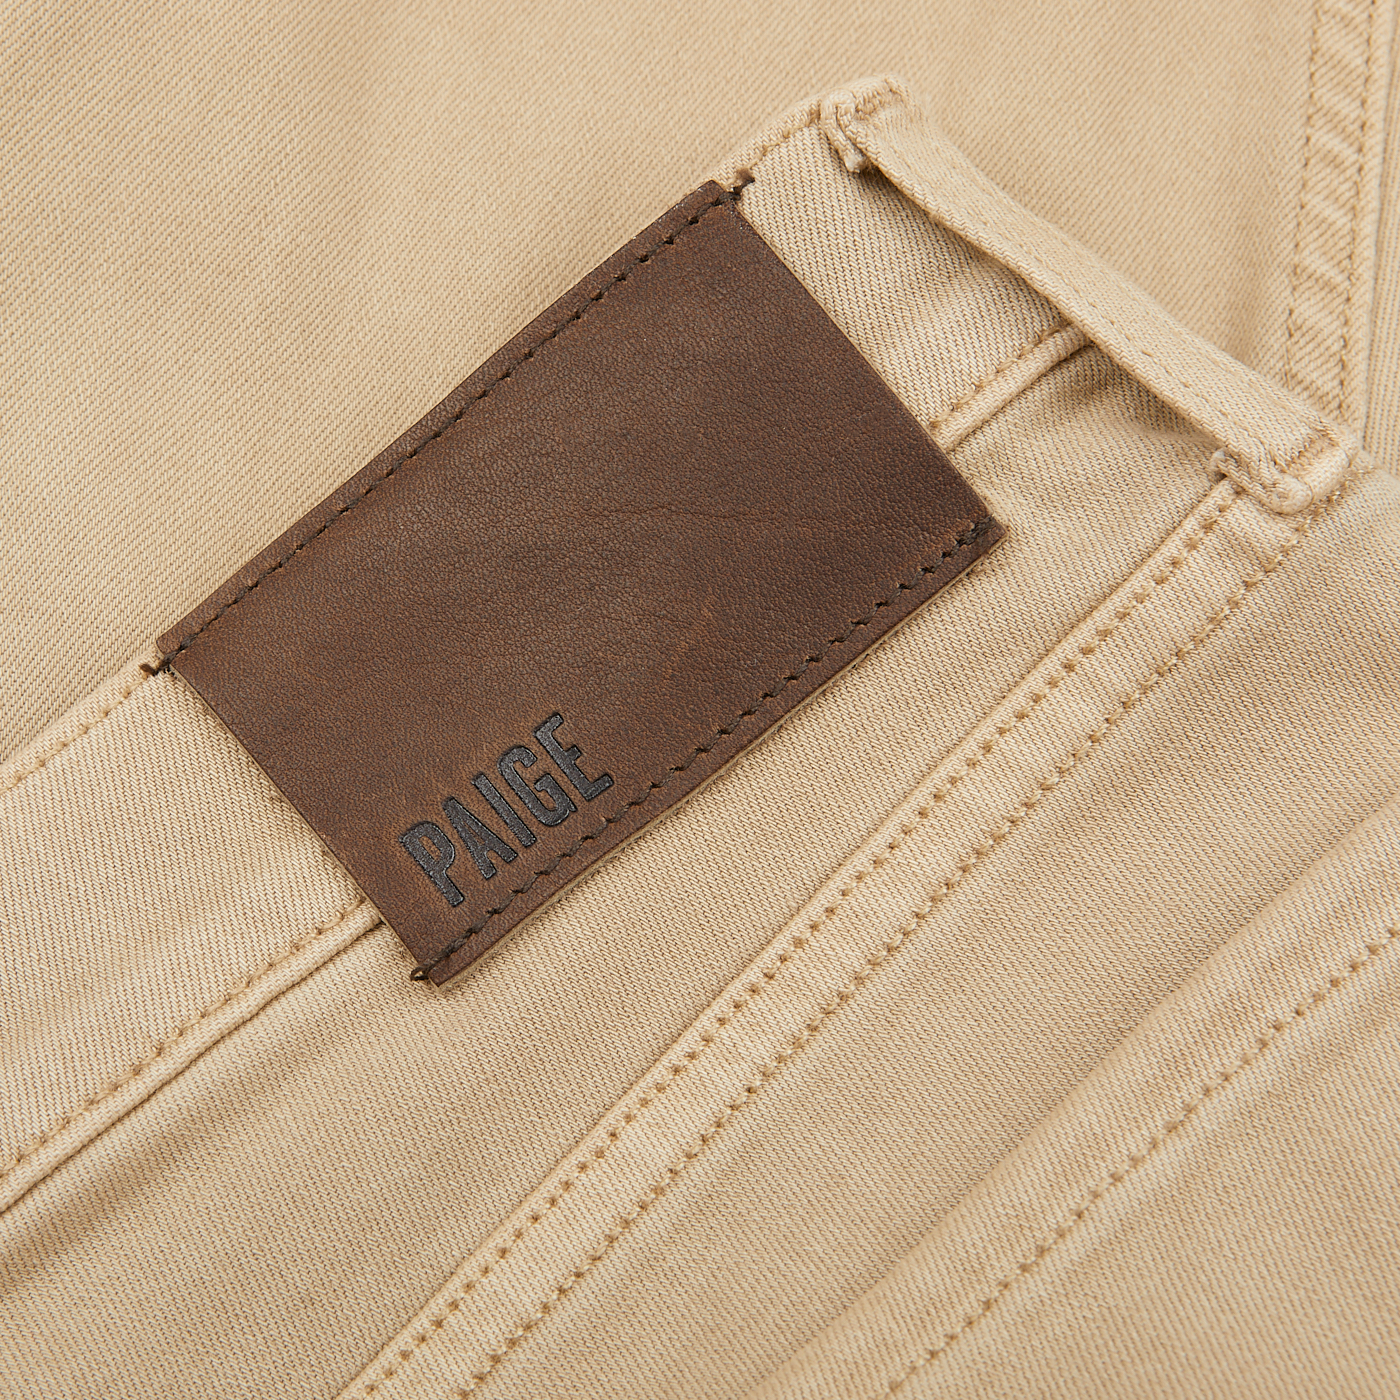 Close-up of a brown leather label with the word "Paige" embossed on a pair of Caramel Beige Cotton Transcend Federal Slim Jeans, made with Transcend fabric for a comfortable fit.